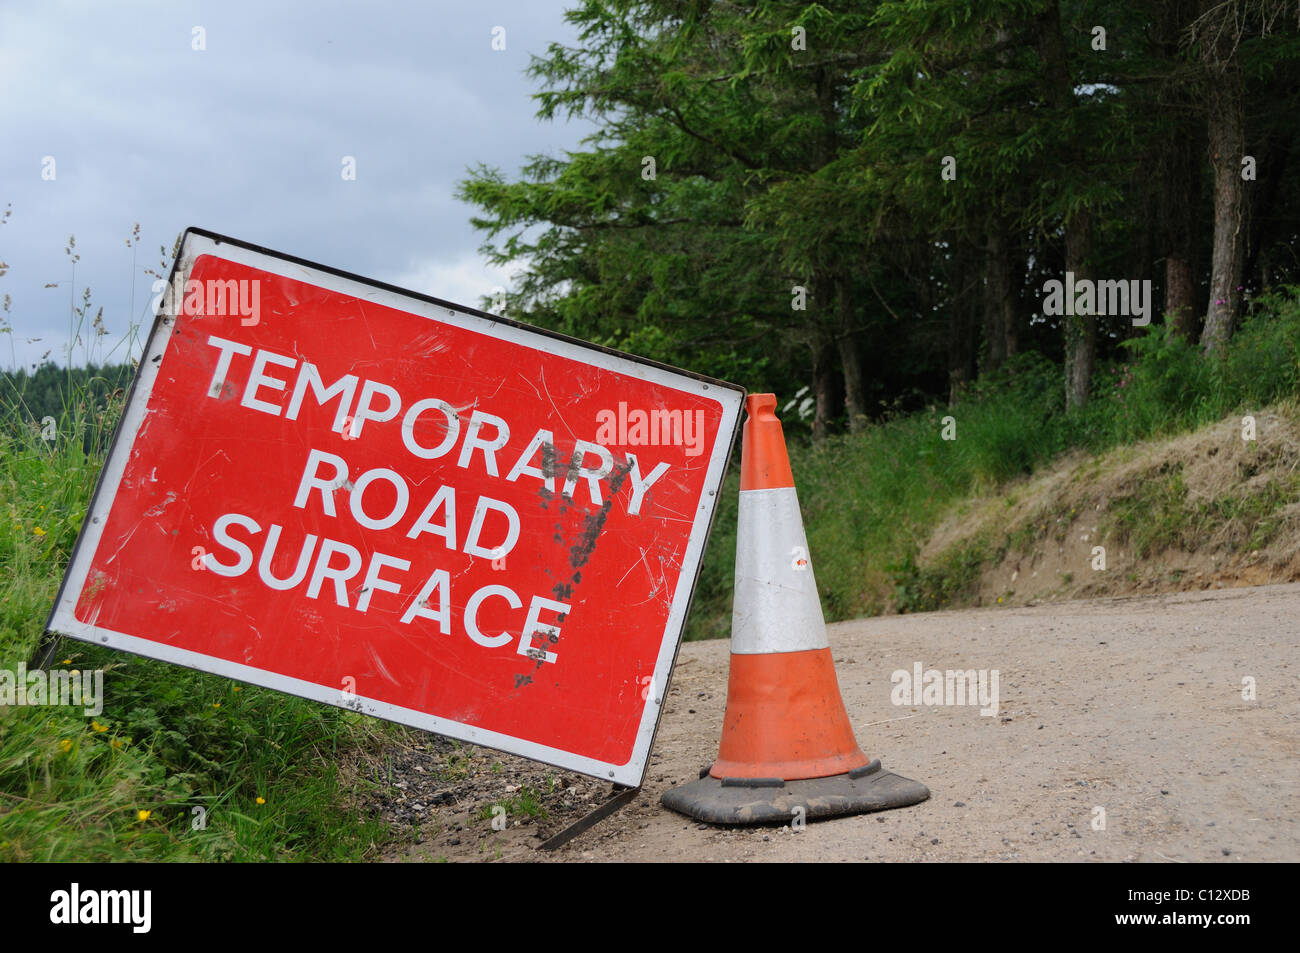 Temporary road surface road sign in a rural lane Stock Photo